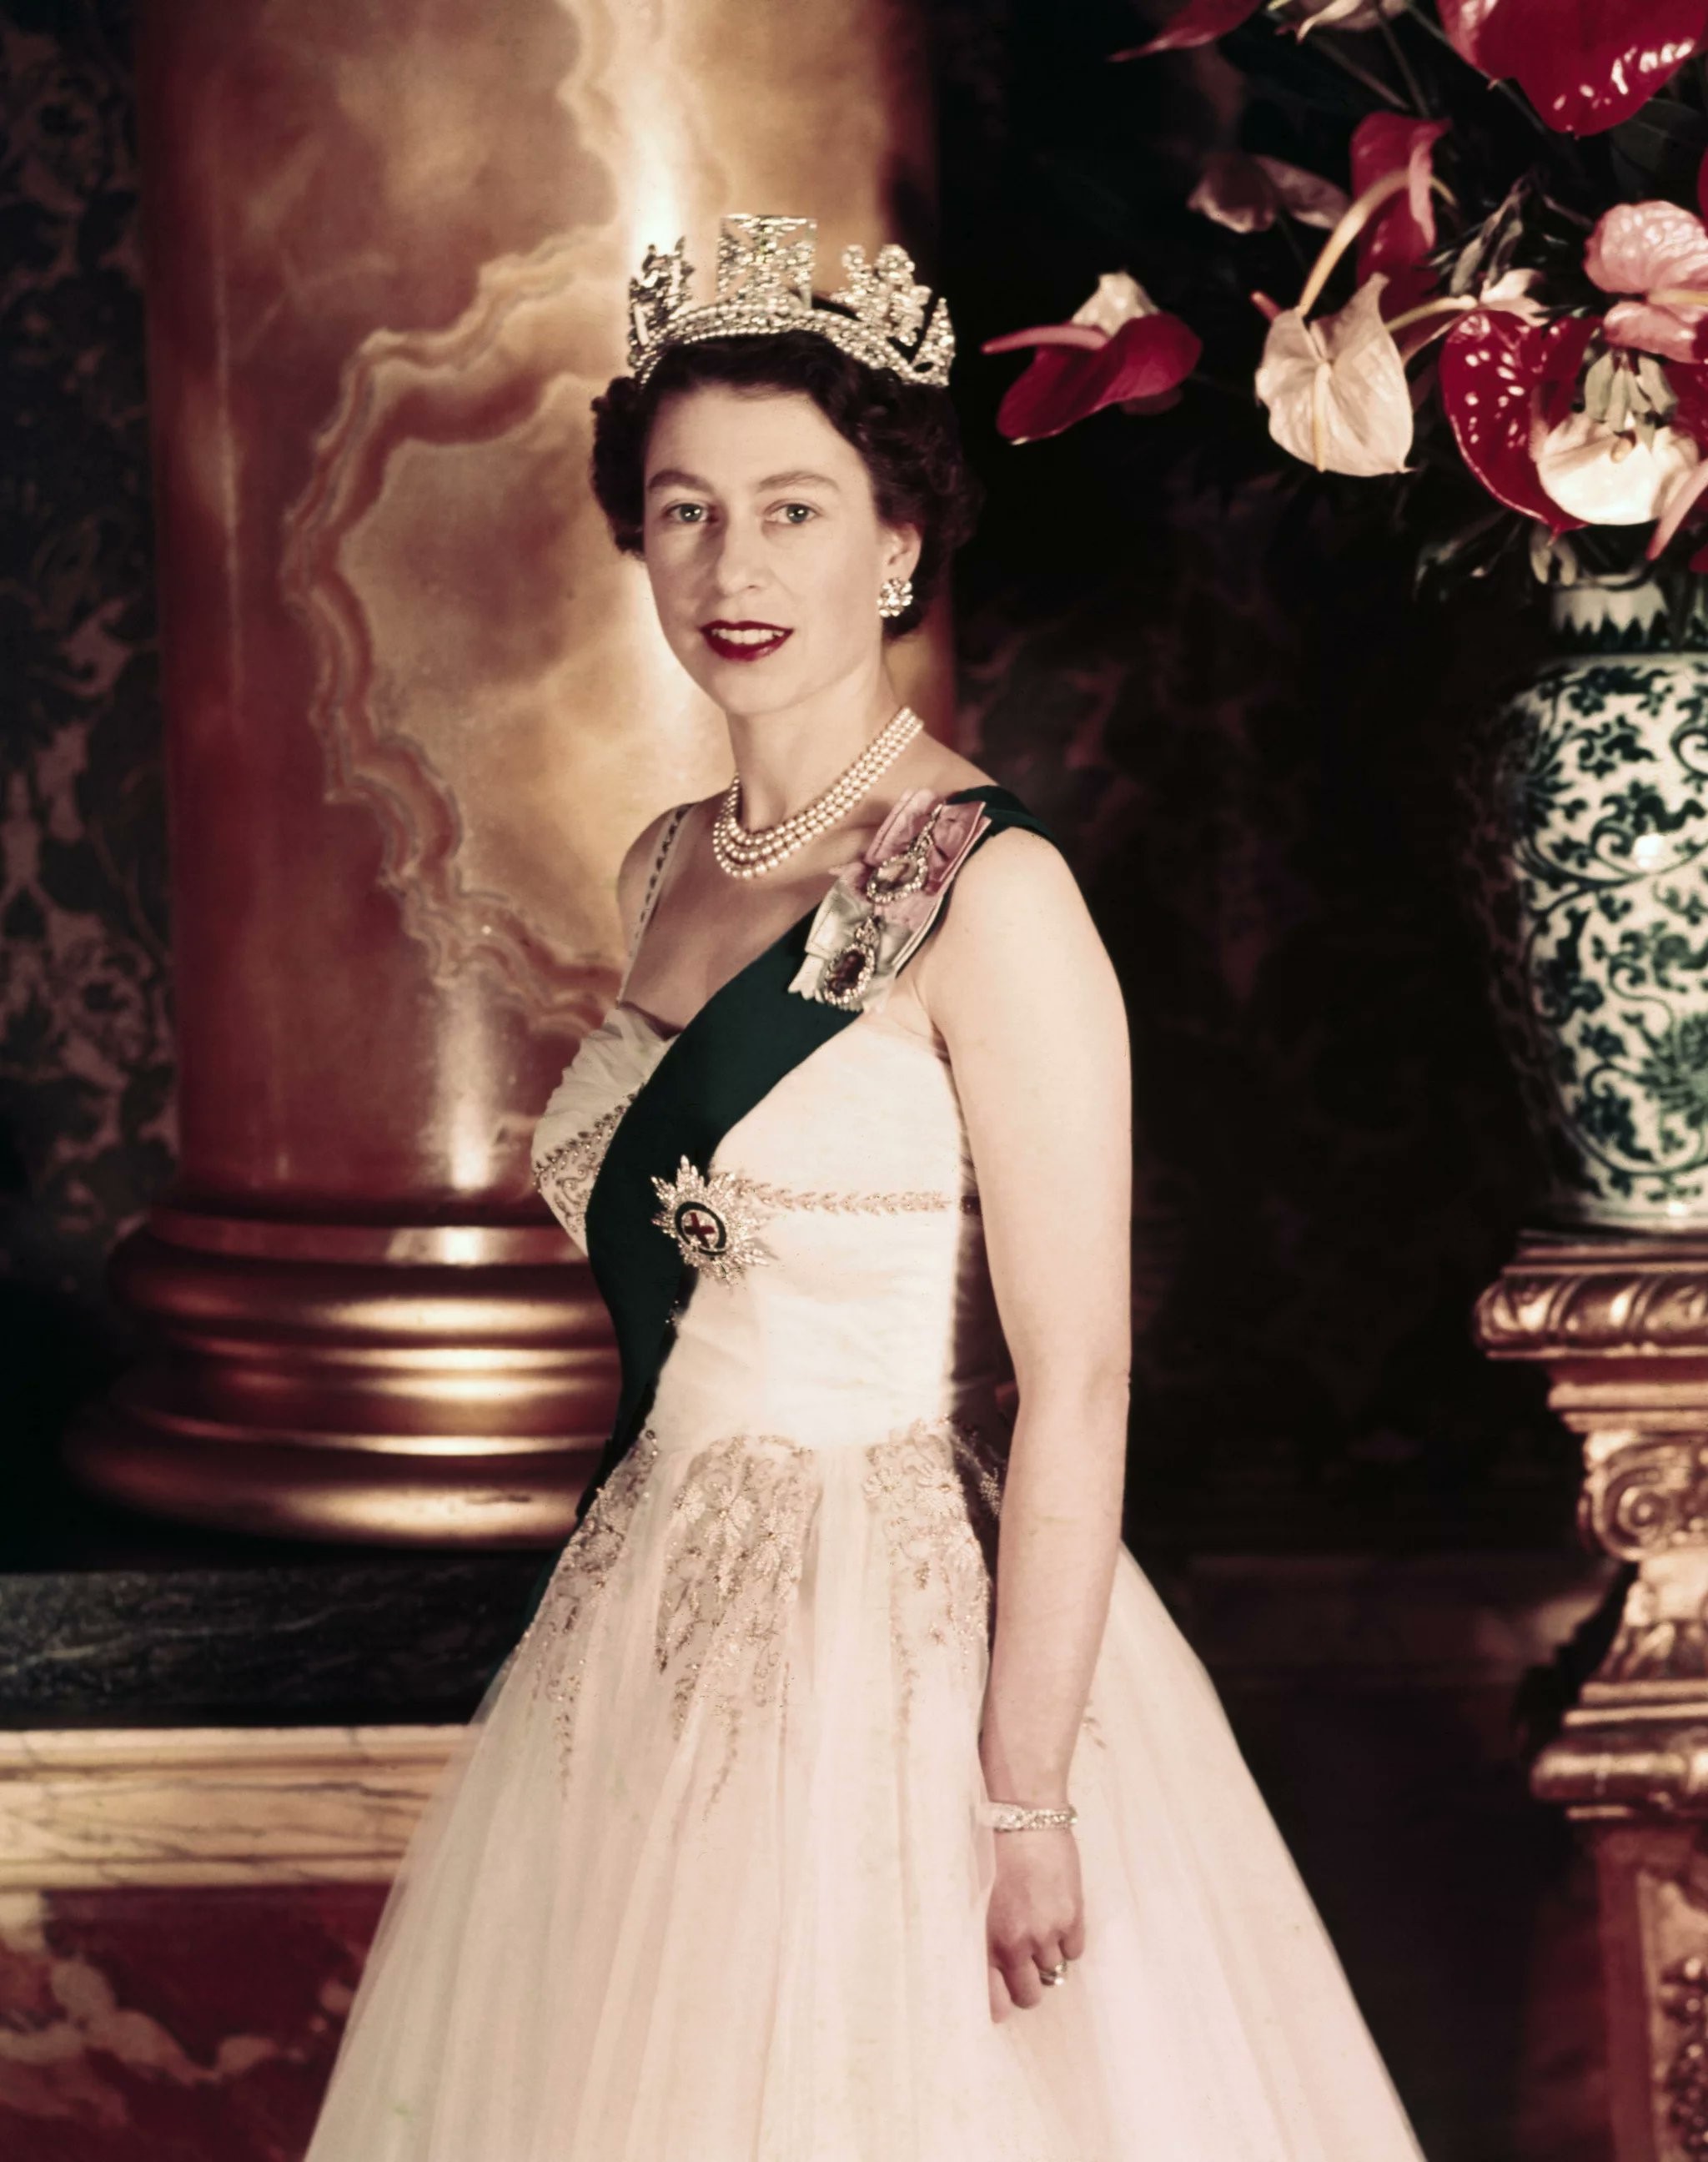 A Tribute To Queen Elizabeth II: 5 Facts You May Not Know About Her Wedding